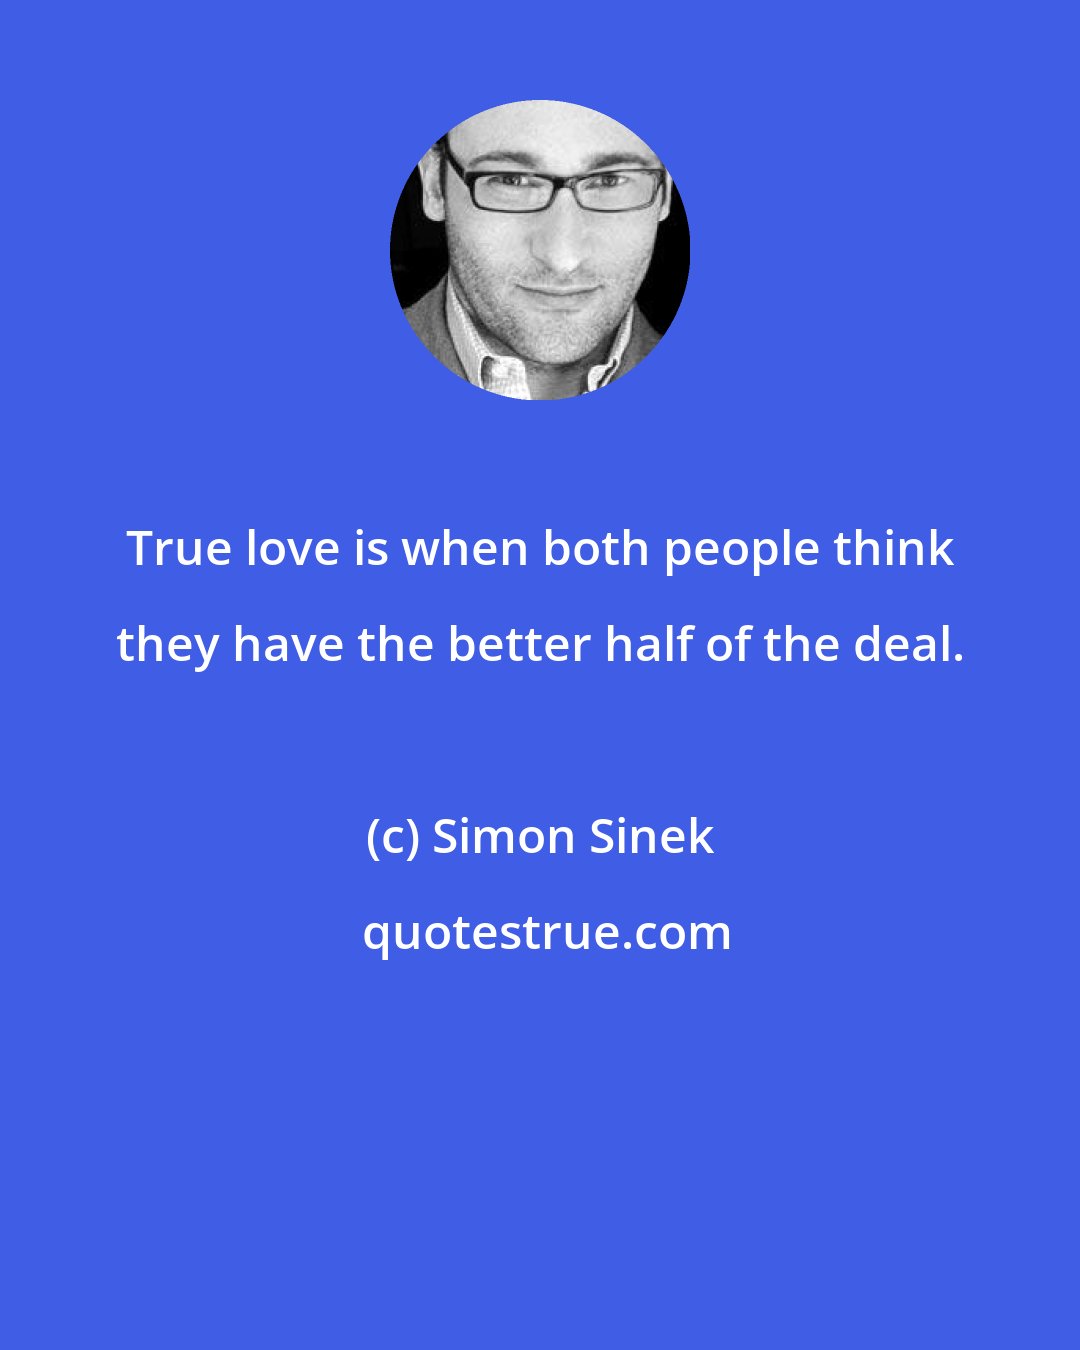 Simon Sinek: True love is when both people think they have the better half of the deal.